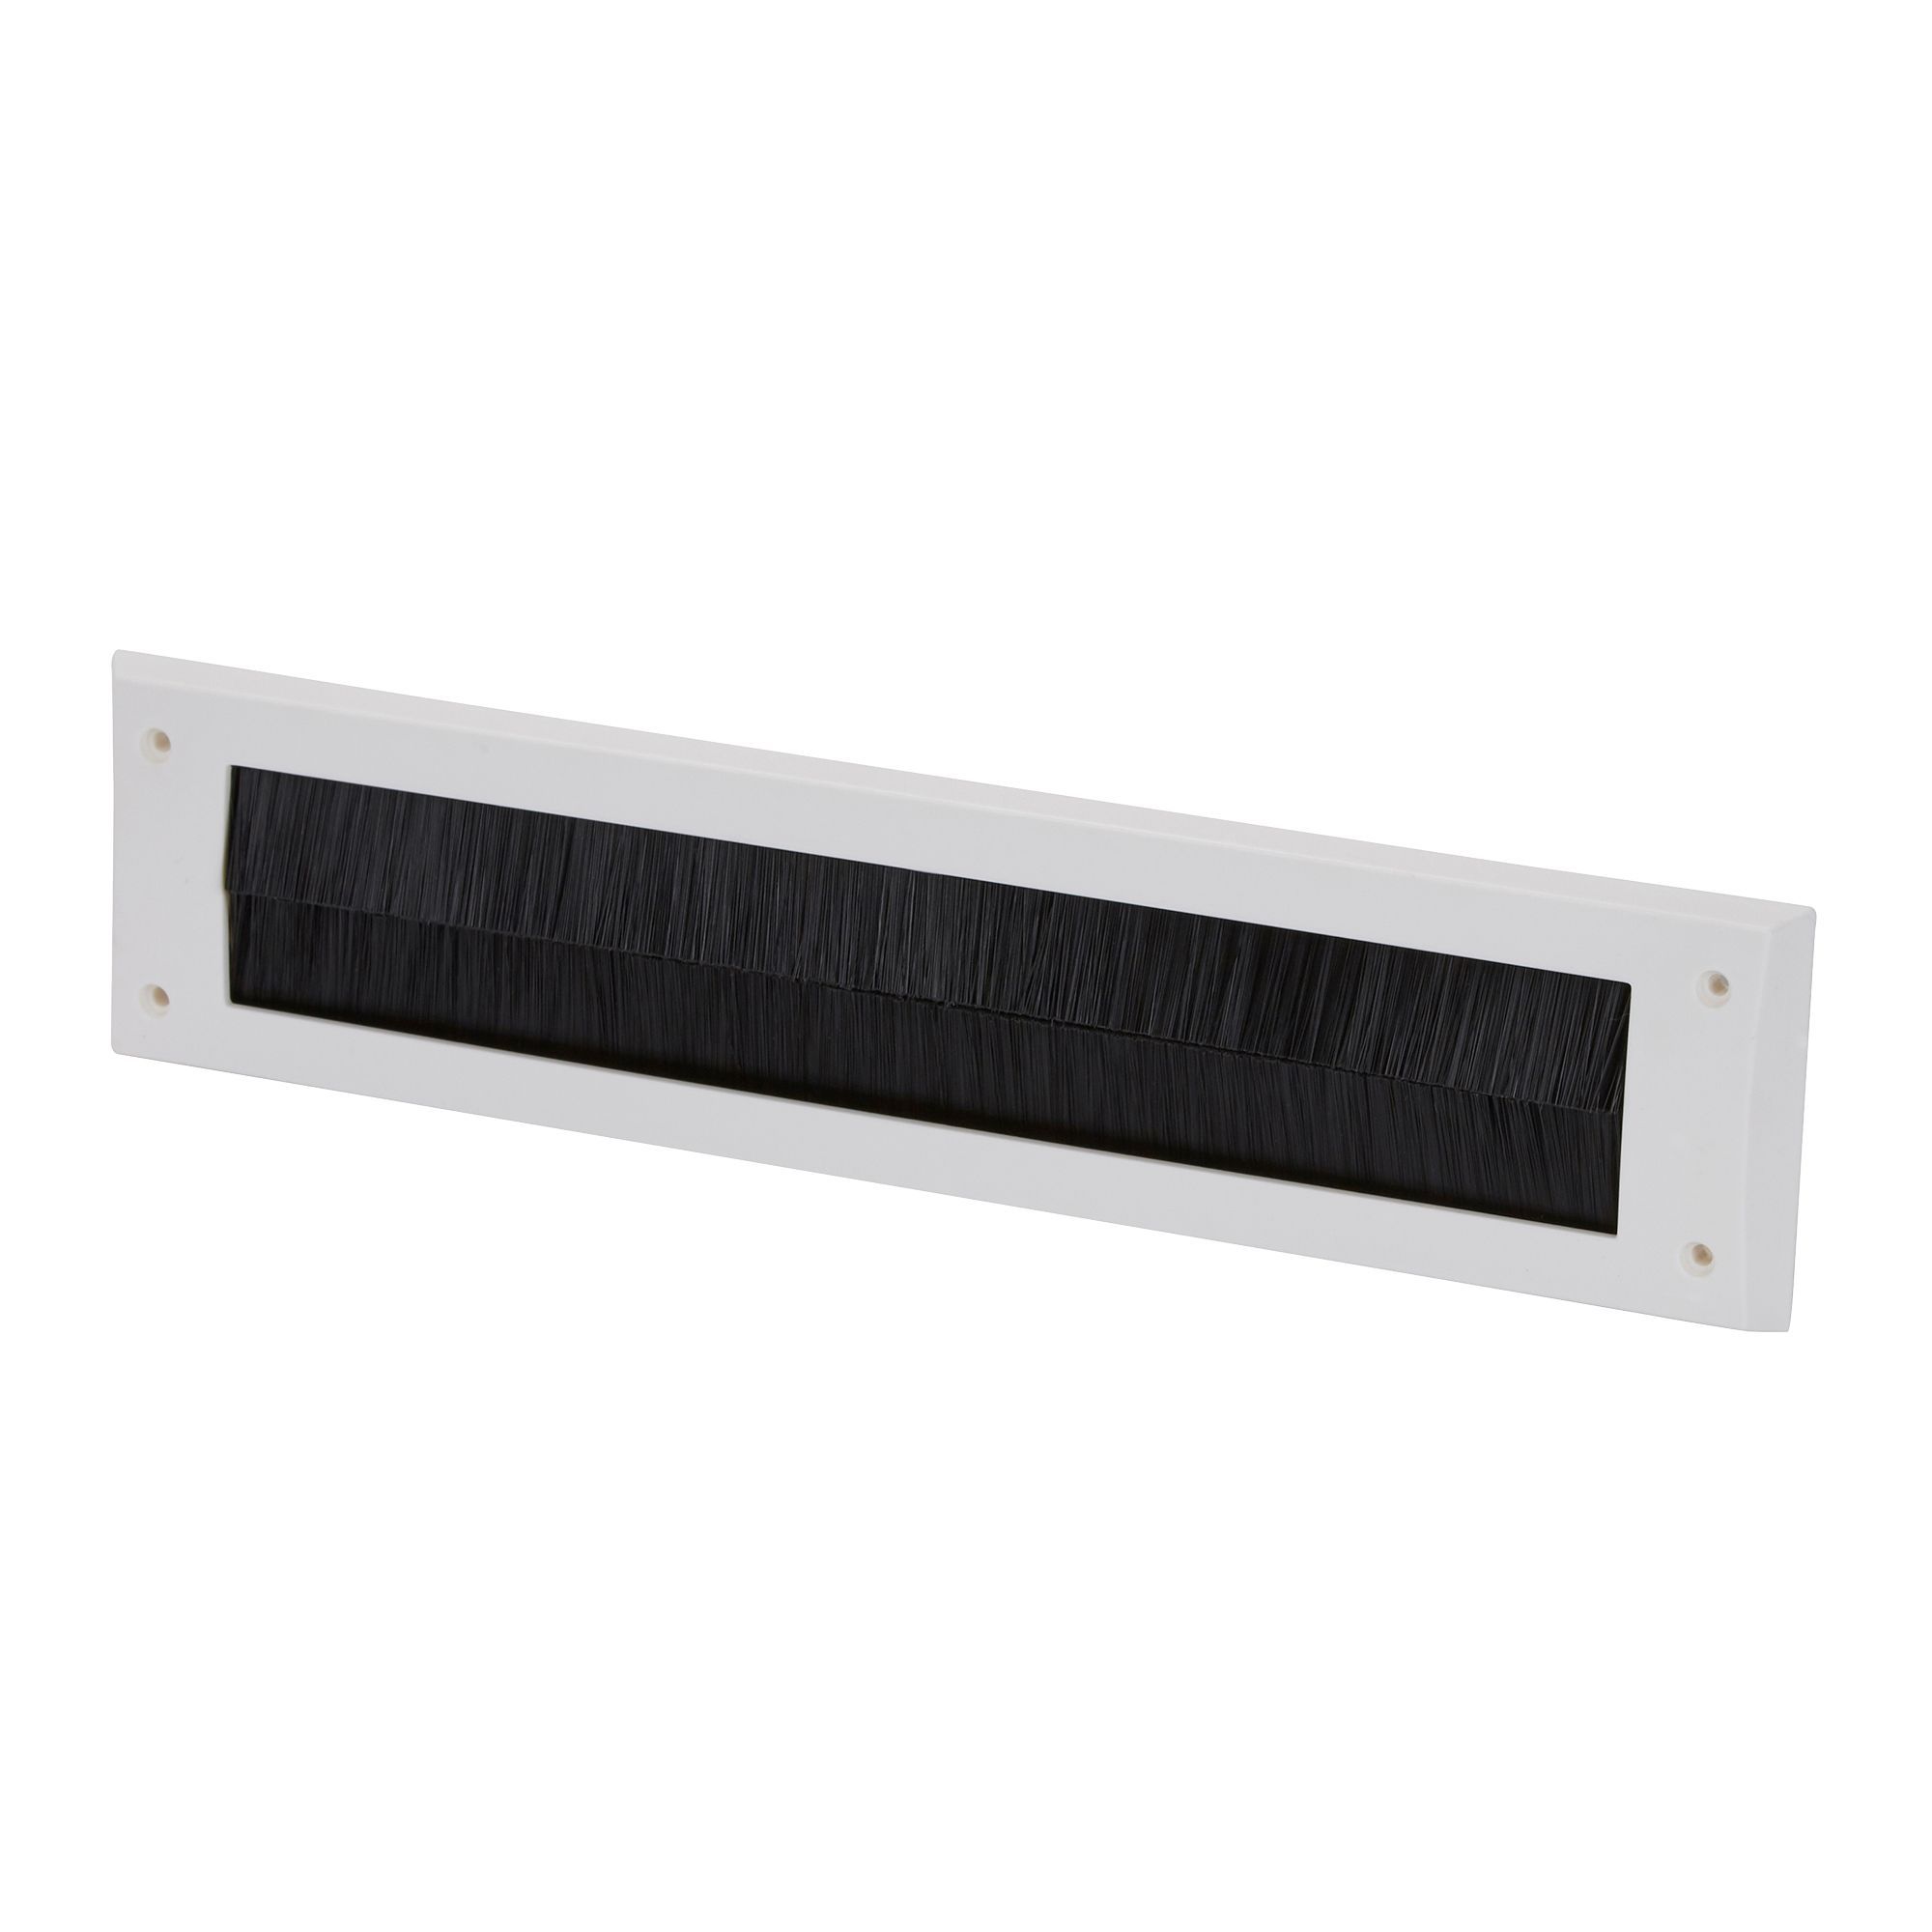 Diall Letterbox draught excluder